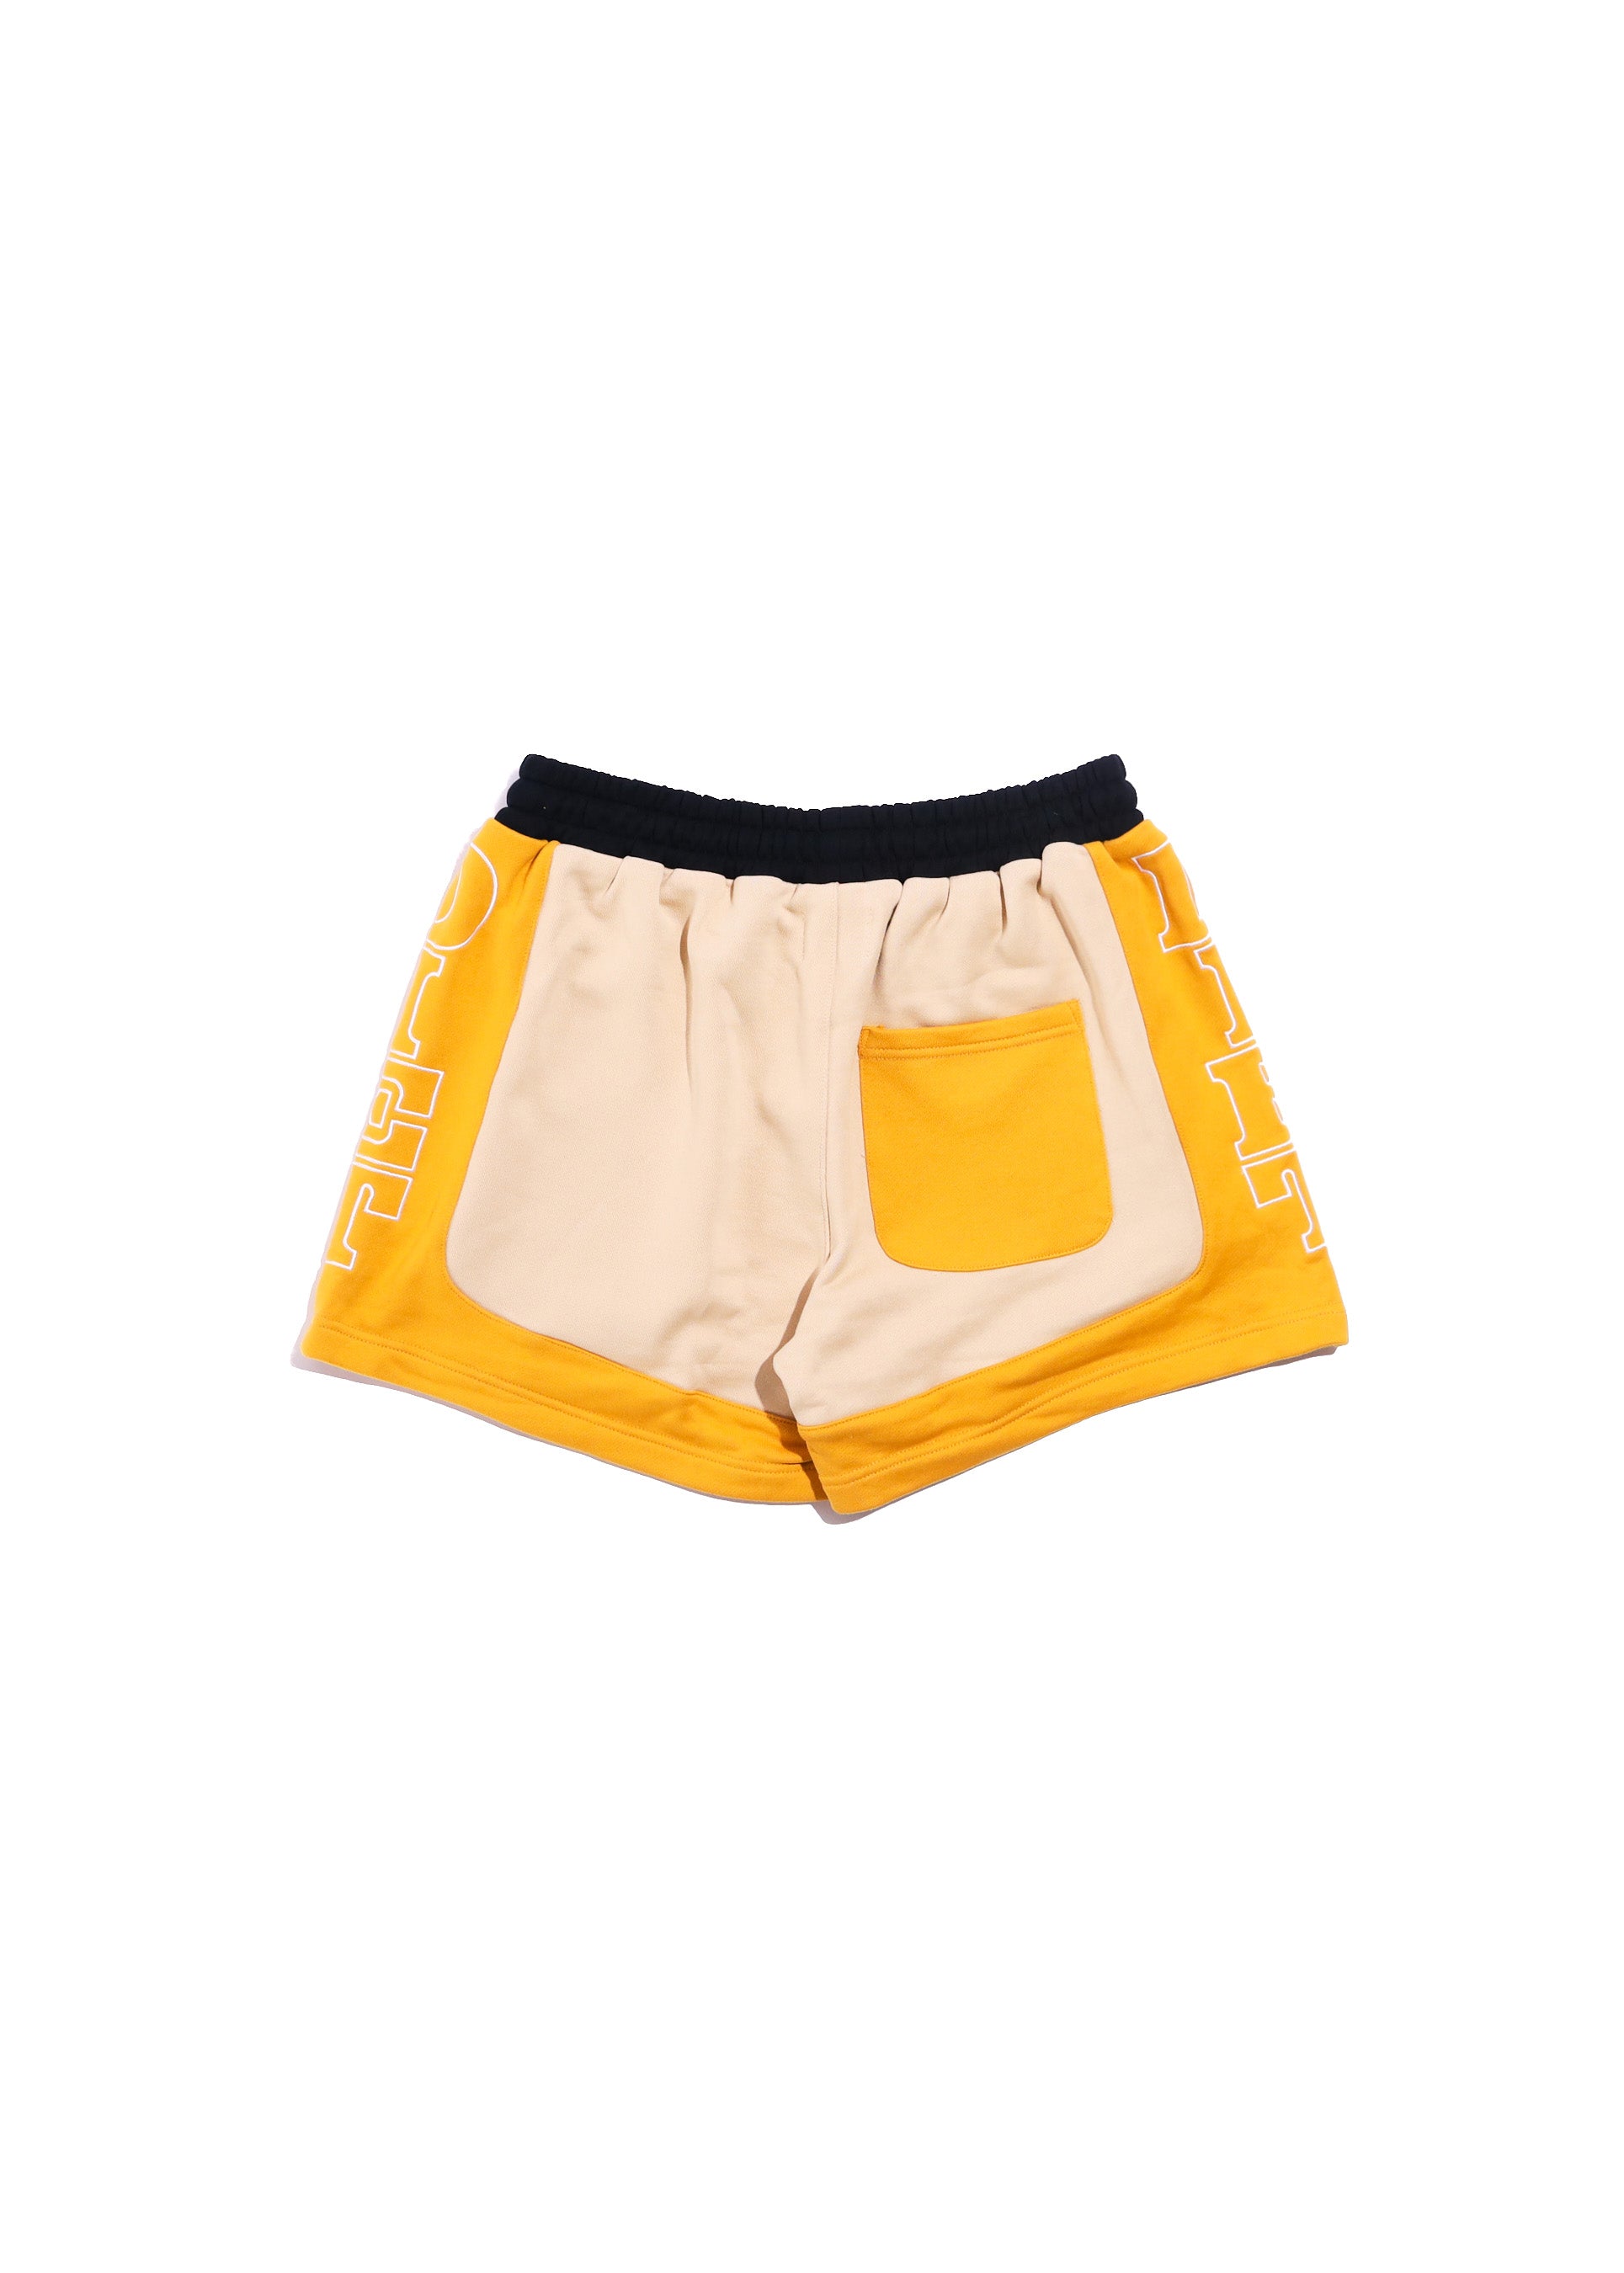 French Terry Row Shorts - Tan/Yellow